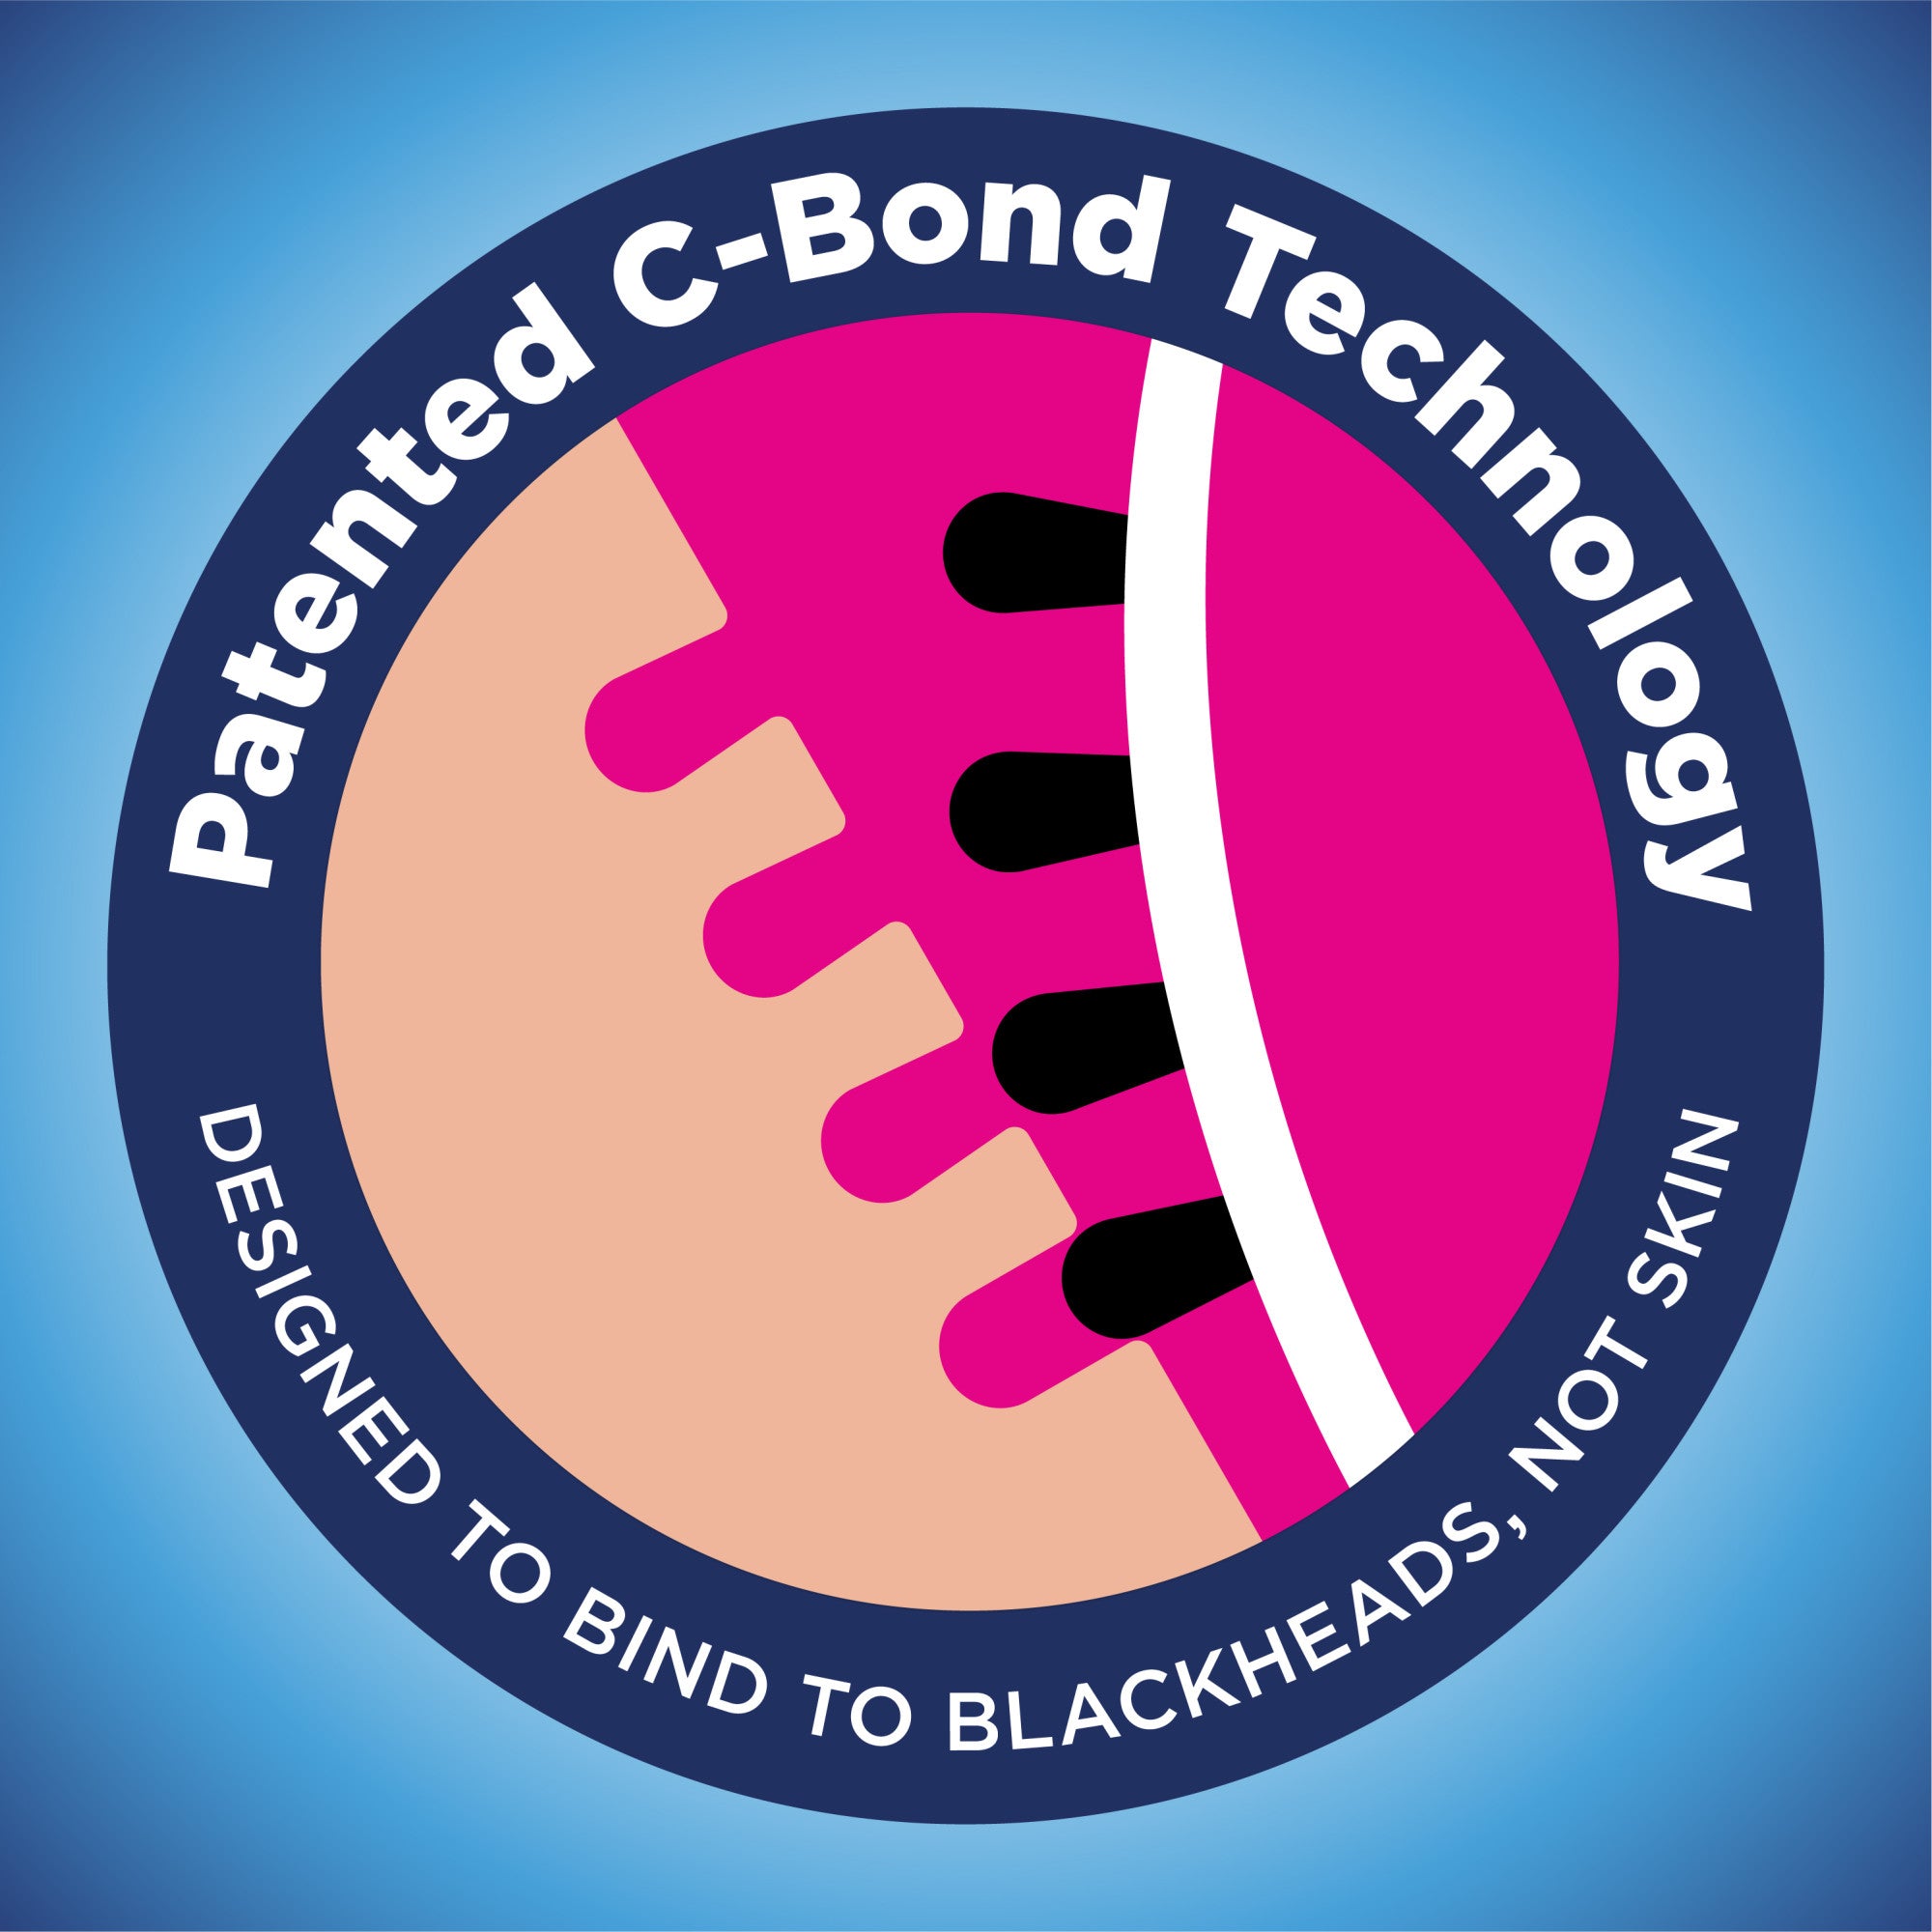 Patented C-Bond Technology. Designed to bind to blackheads, not skin.